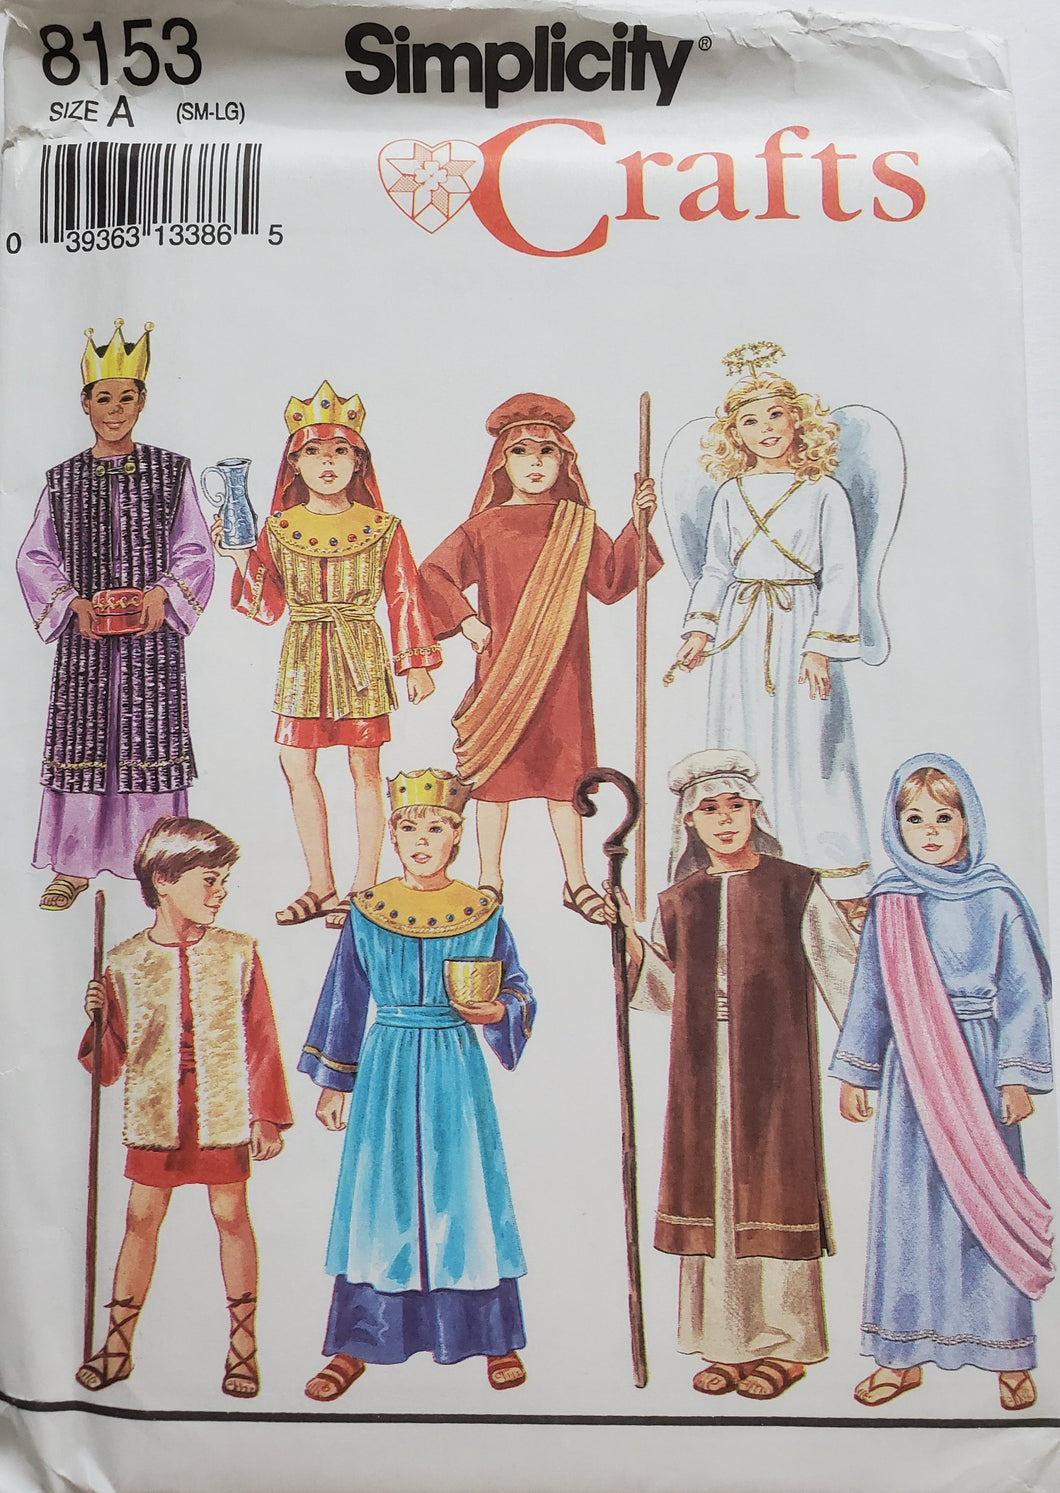 Simplicity 8153 UNCUT, Boy's and Girl's Costumes, Sizes SM-LG, Vintage